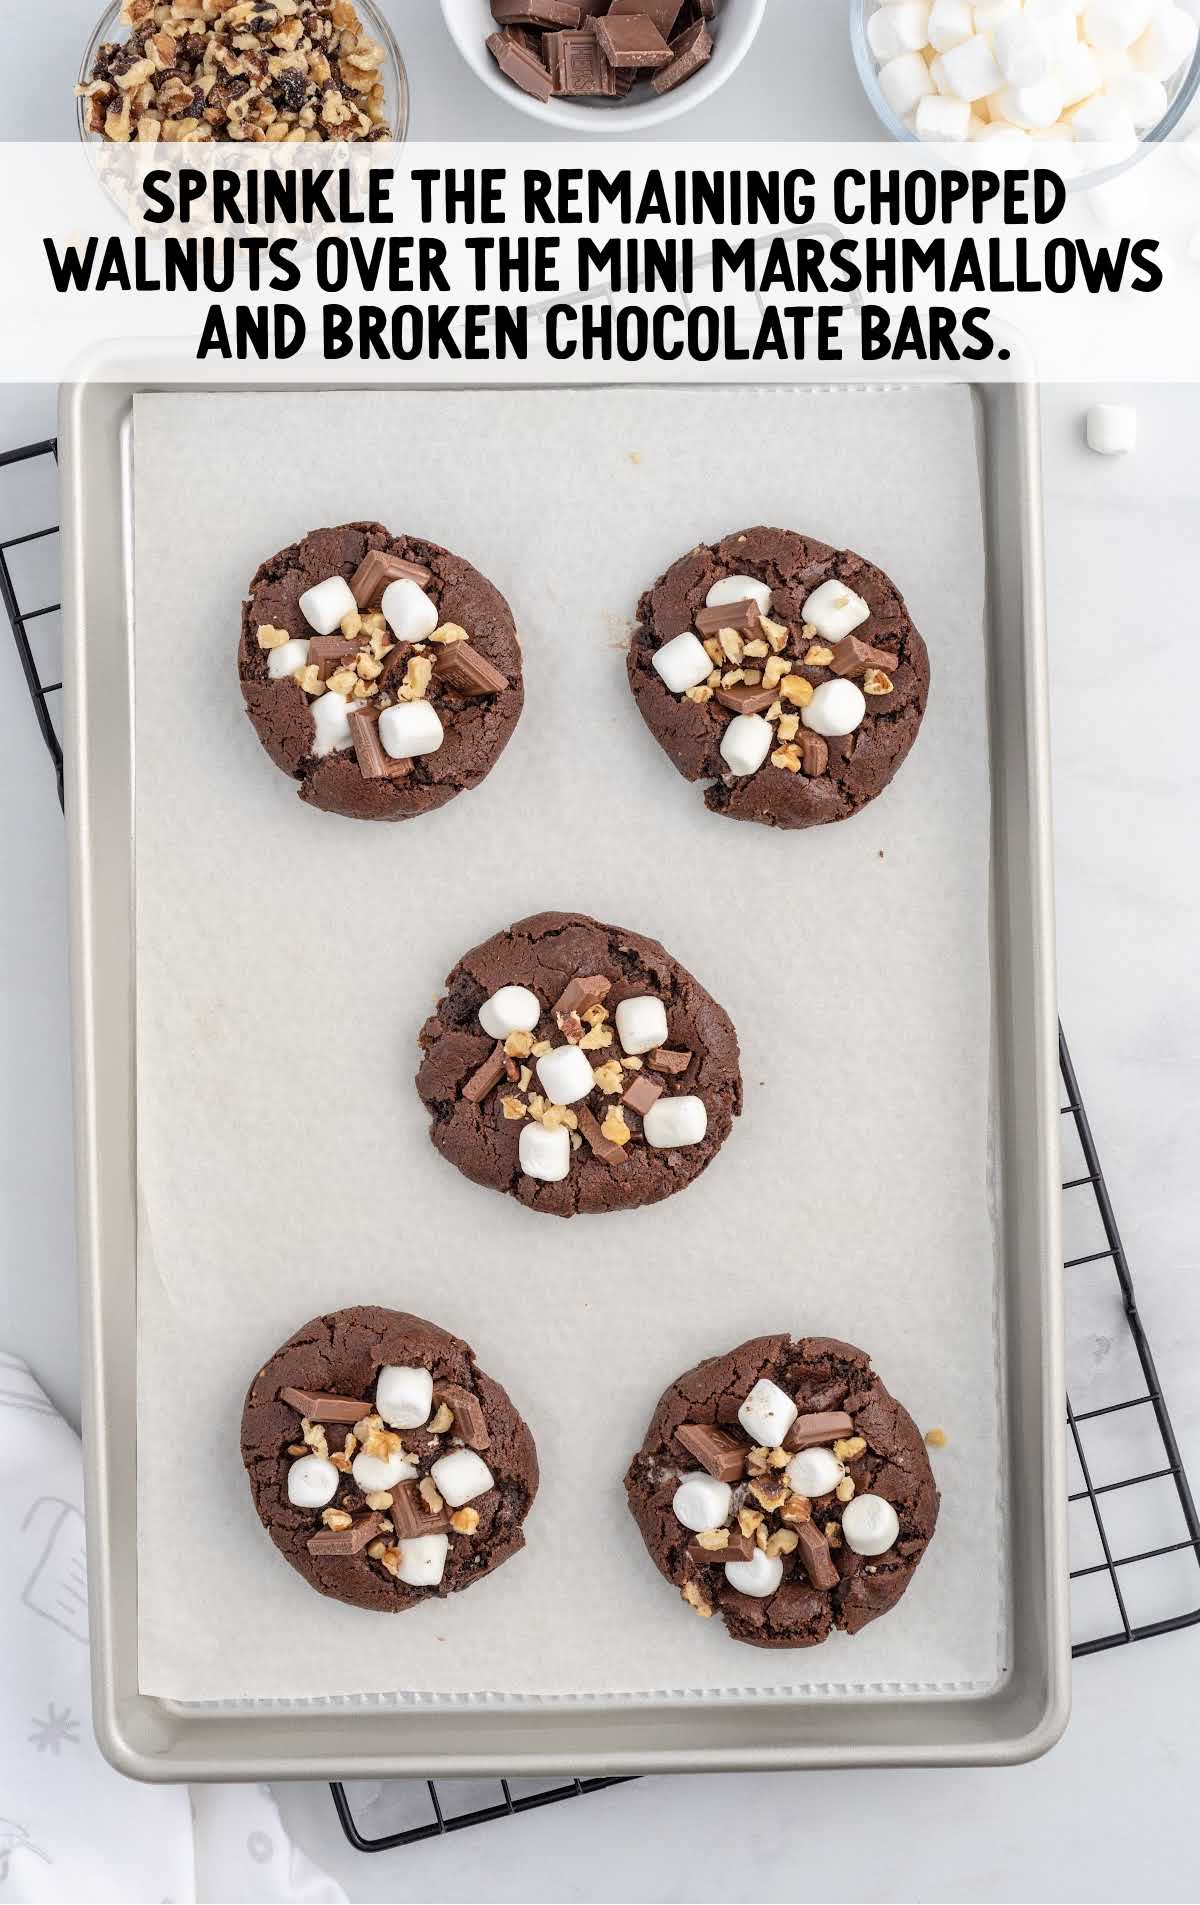 walnuts sprinkled over the marshmallows and chocolate bars on a baking sheet